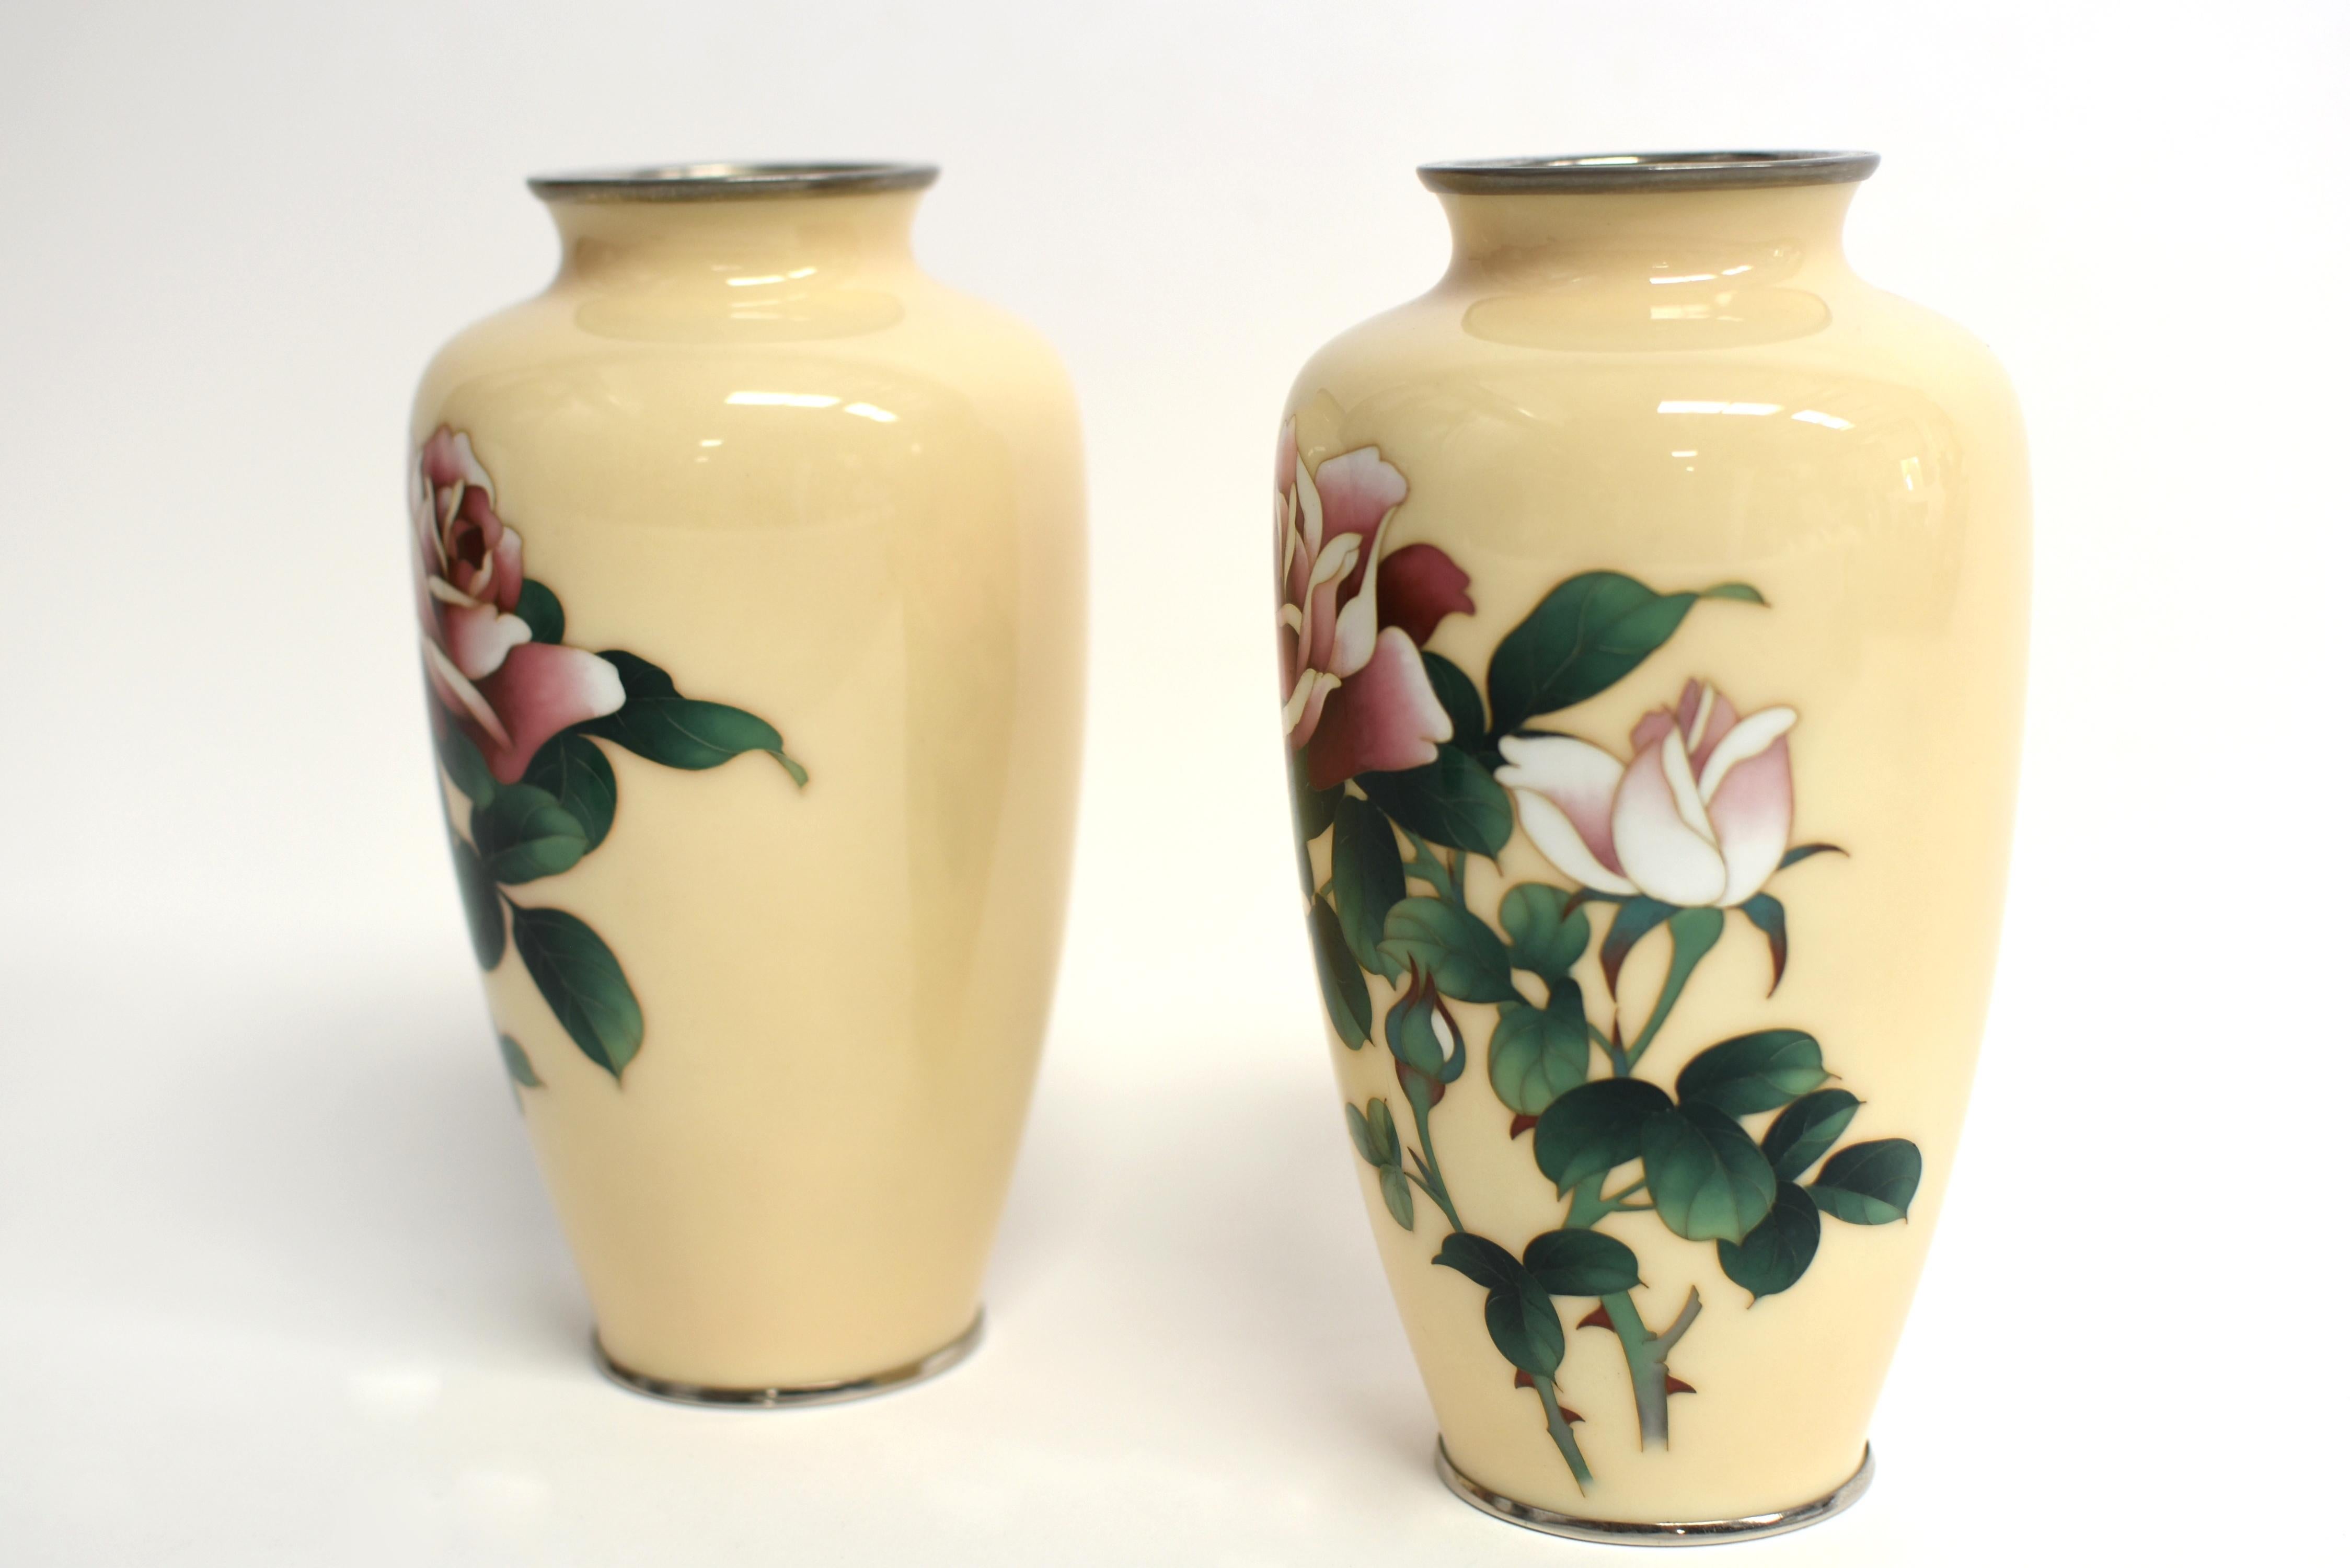 A very rare offering of pair of beautiful Ando Jubei (1876-1956) Rose vases in excellent condition. In classic form with elegant raised shoulders, the master artist employed superb wireless technique and colored enamels of butterscotch, burgundy,